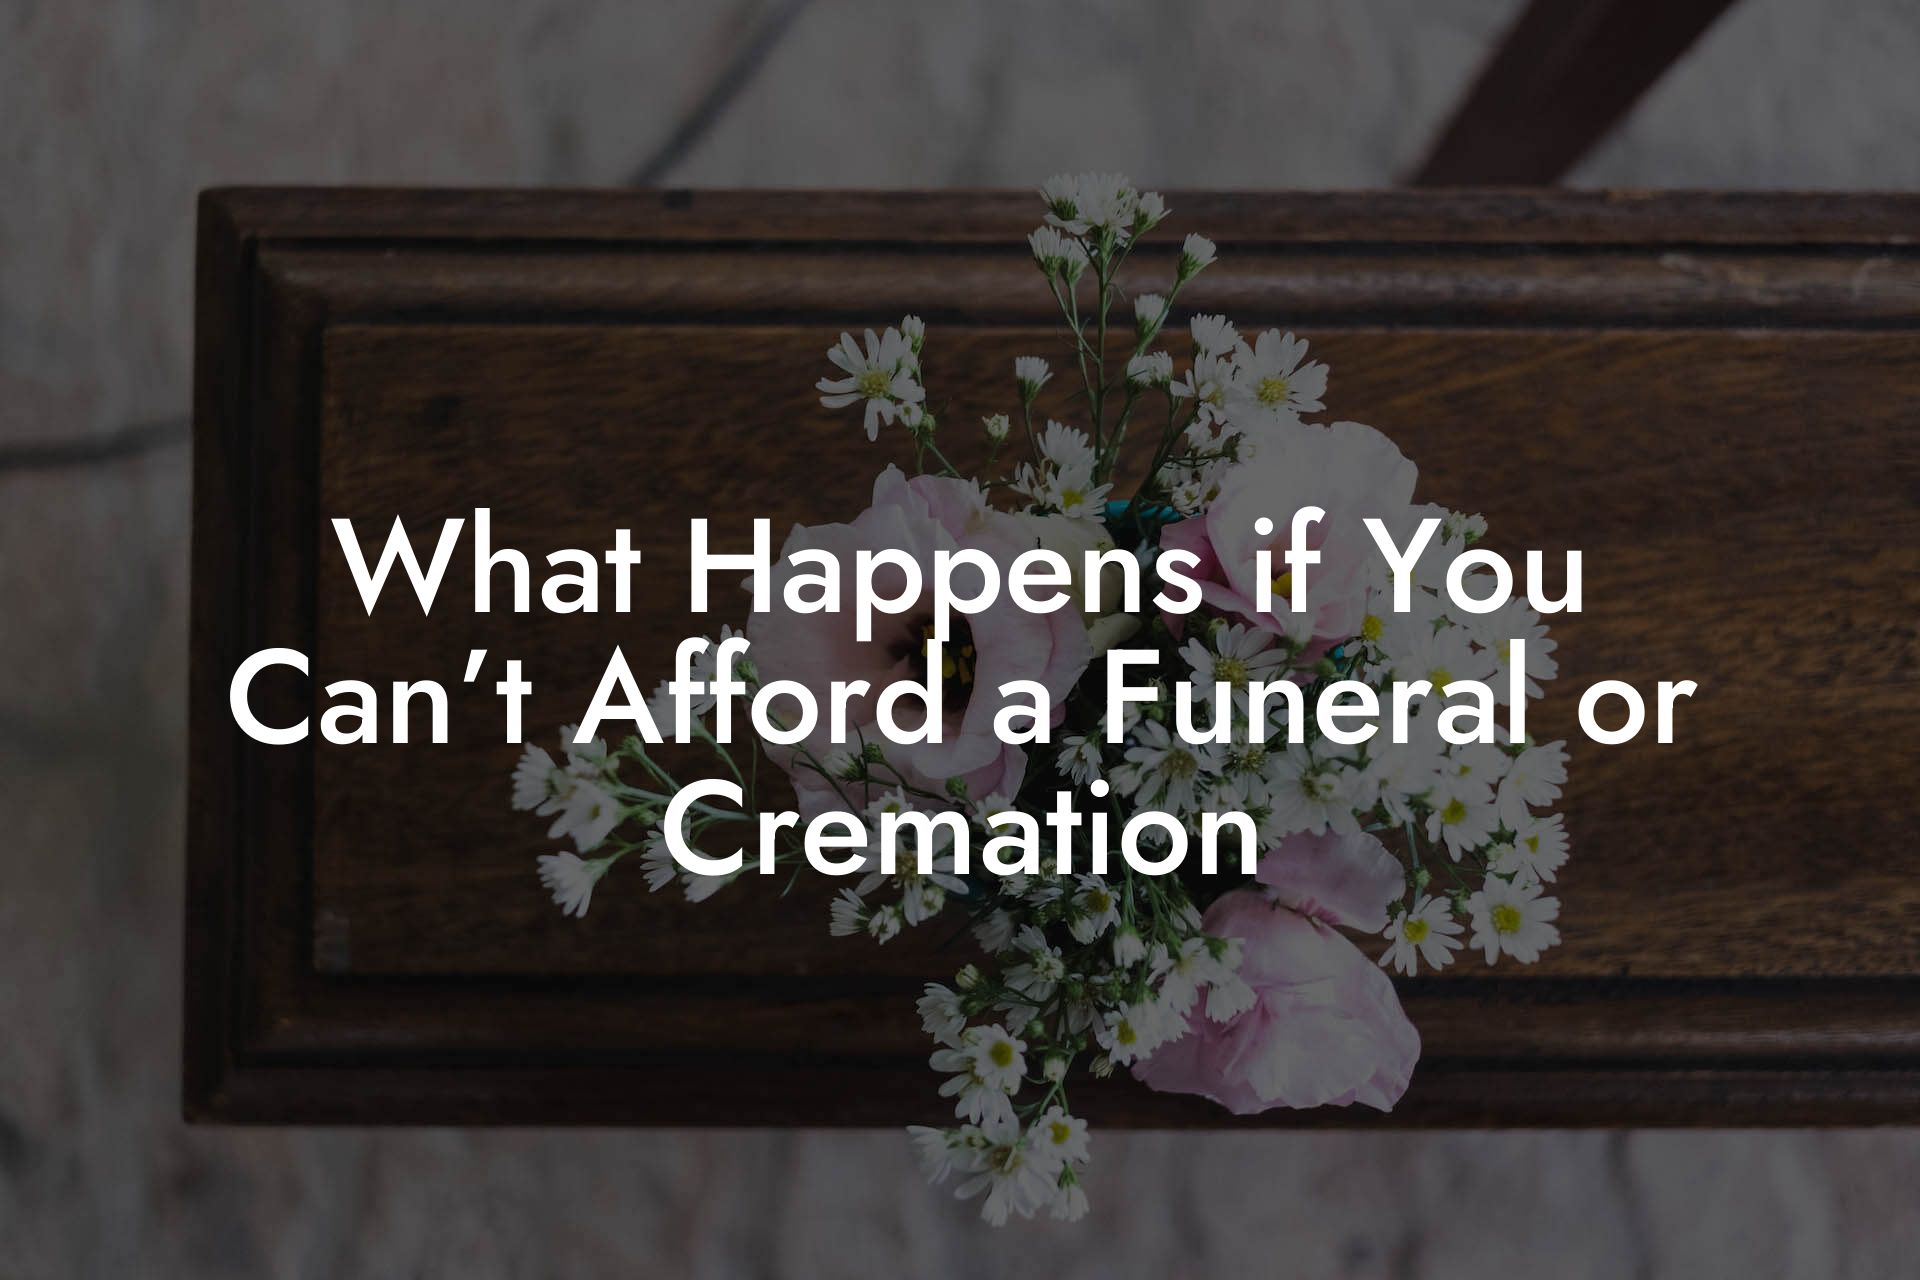 What Happens if You Can’t Afford a Funeral or Cremation